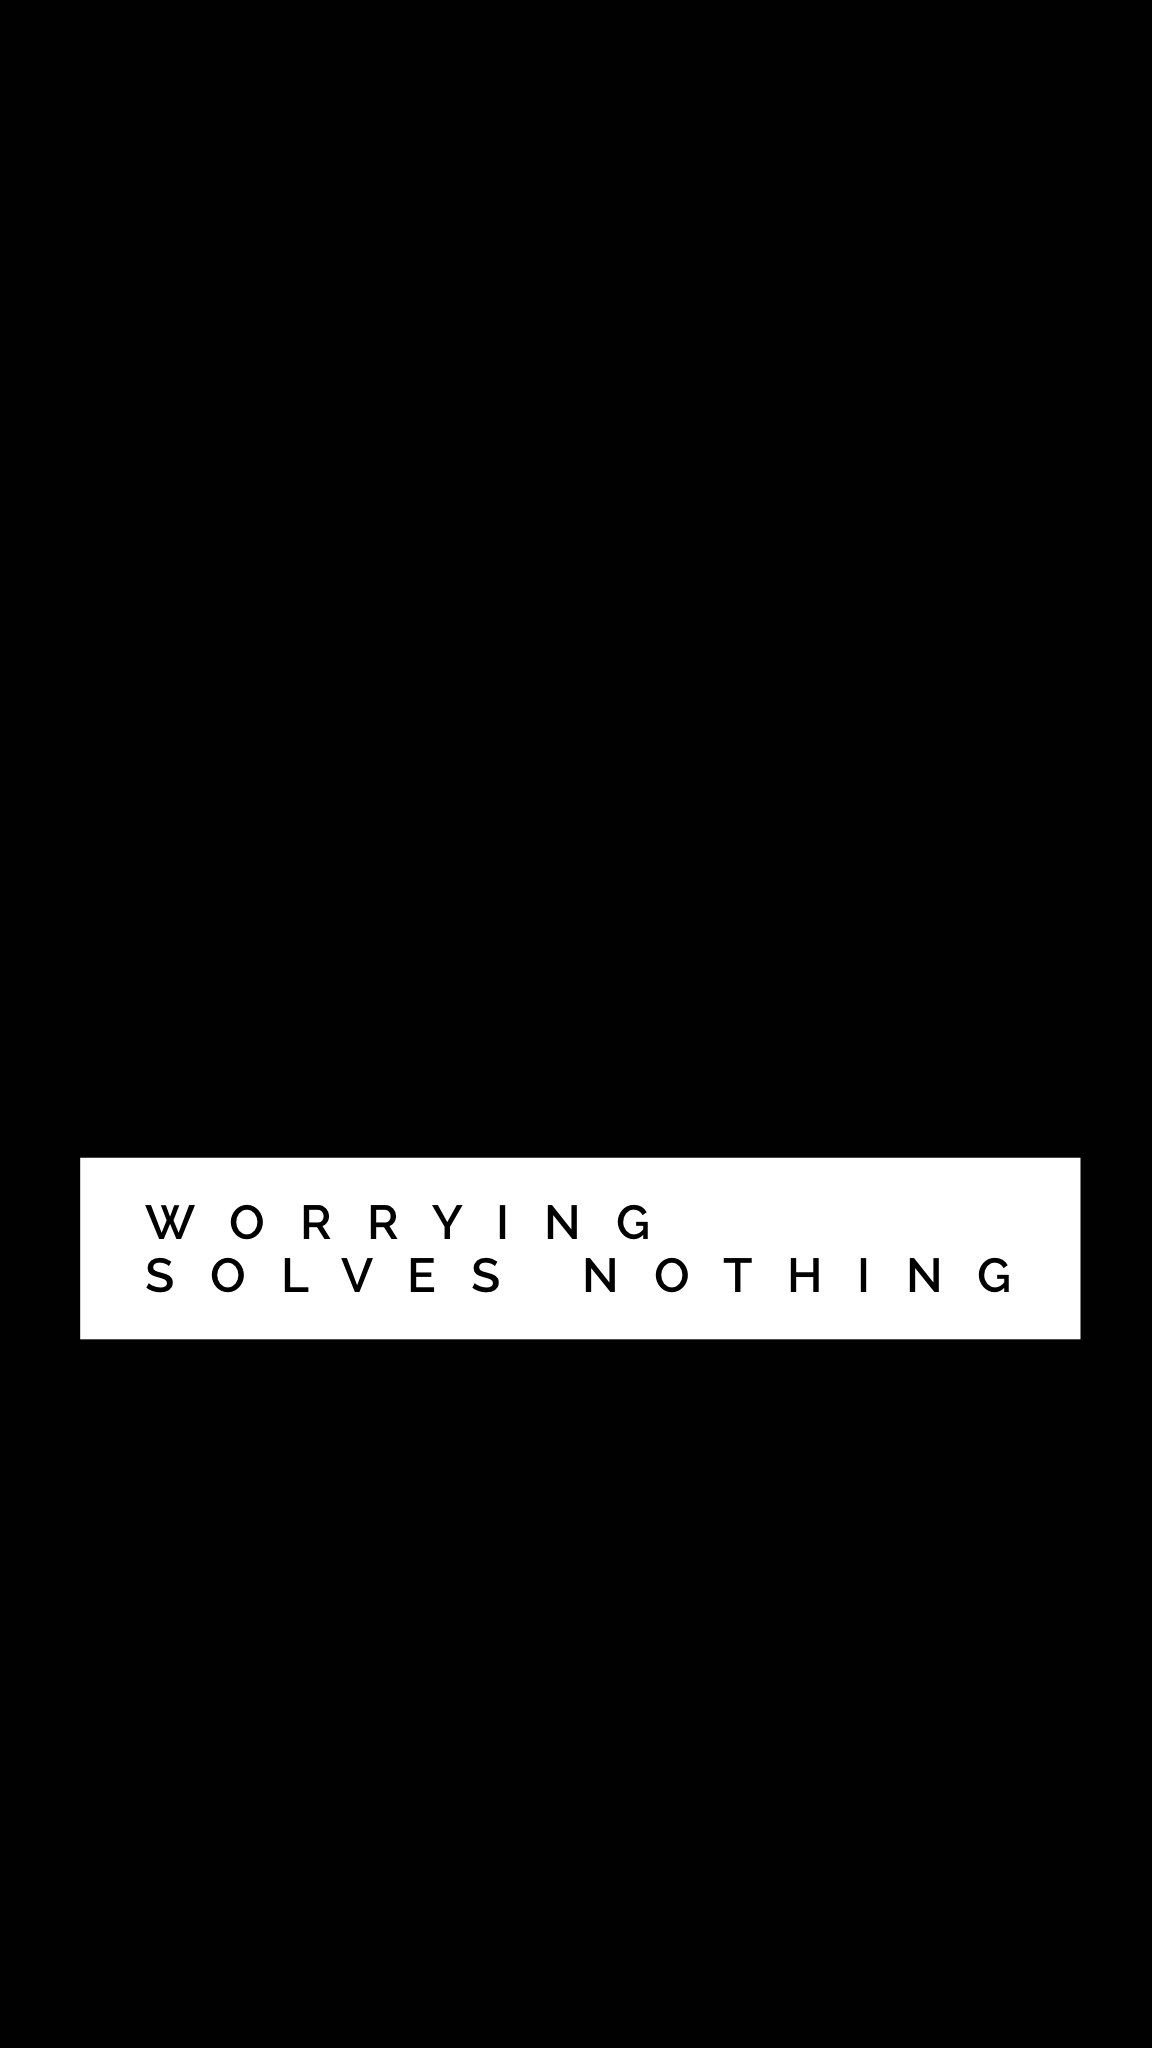 Wallpaper, wall, background, iPhone, Android, minimal, simple, quote